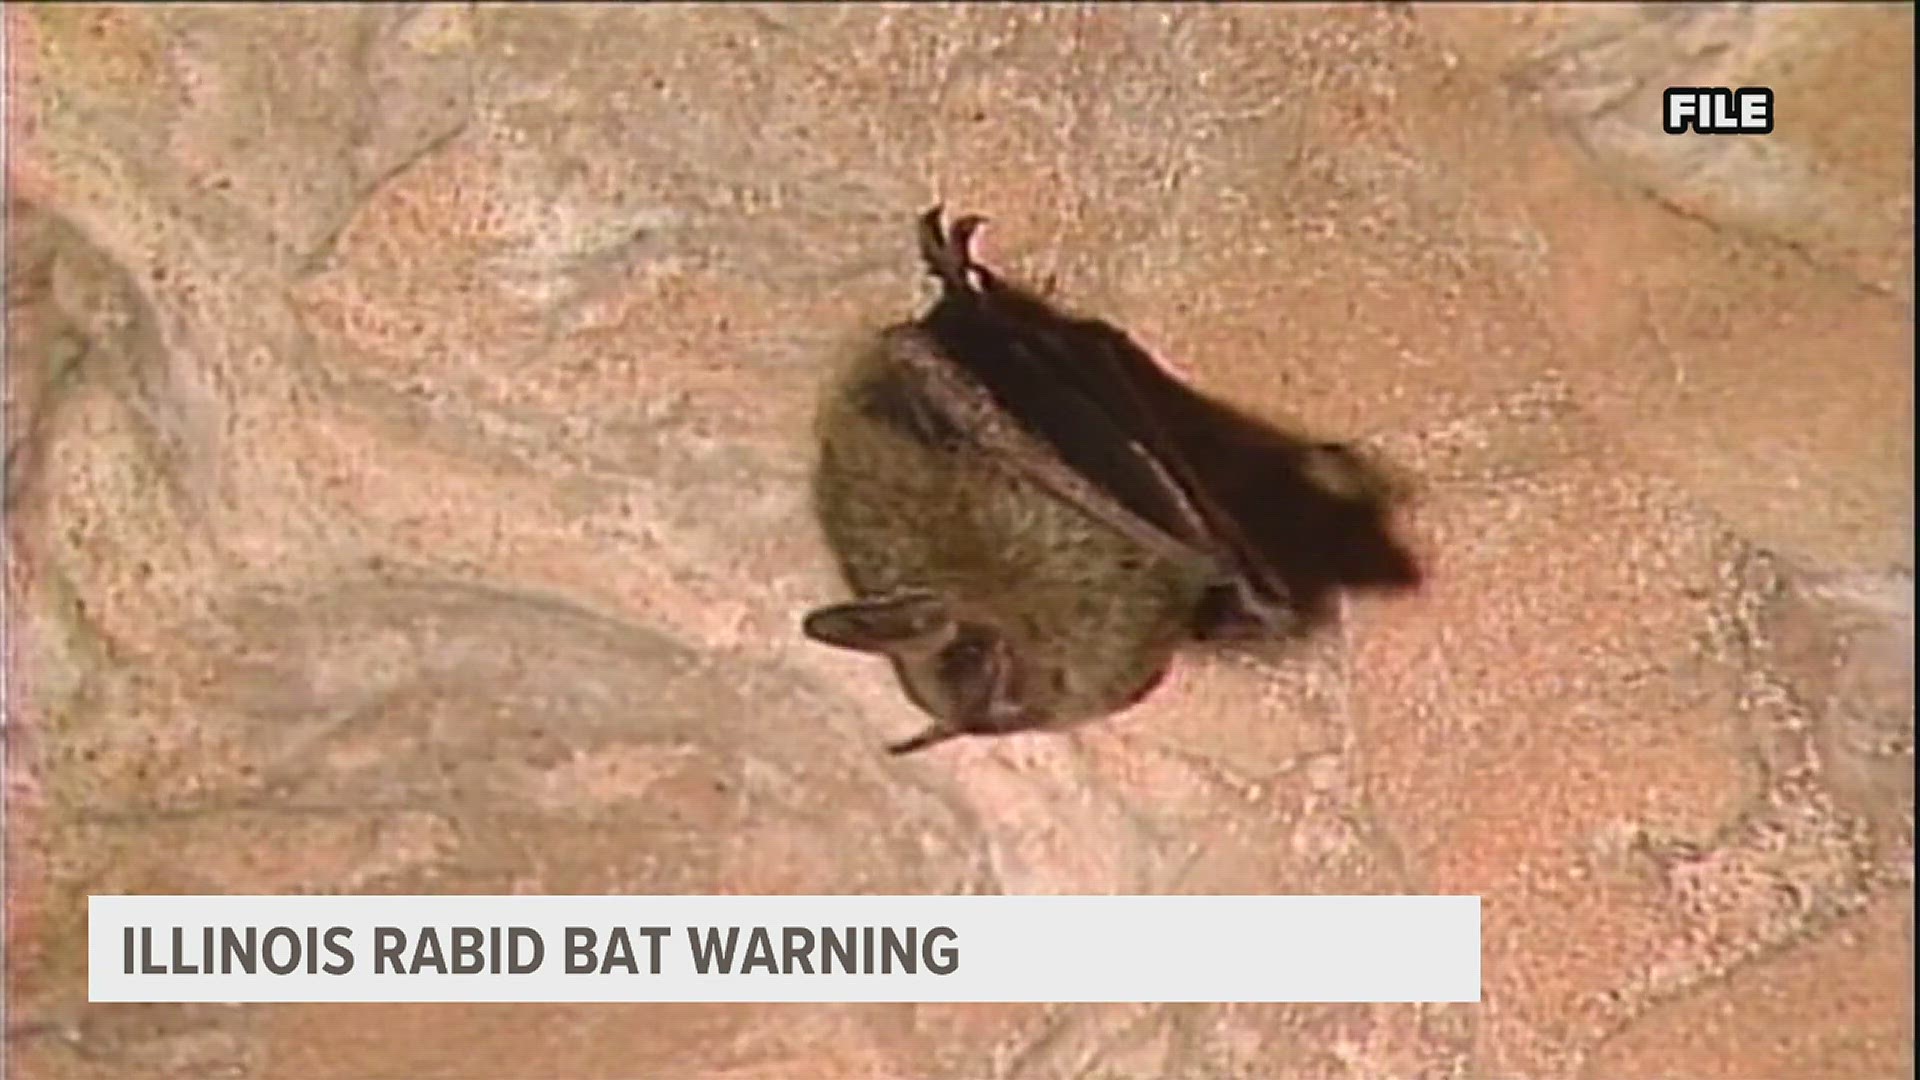 Illinois Department of Public Health officials are warning the public for the risk of rabies. Residents are advised to avoid contact with bats.